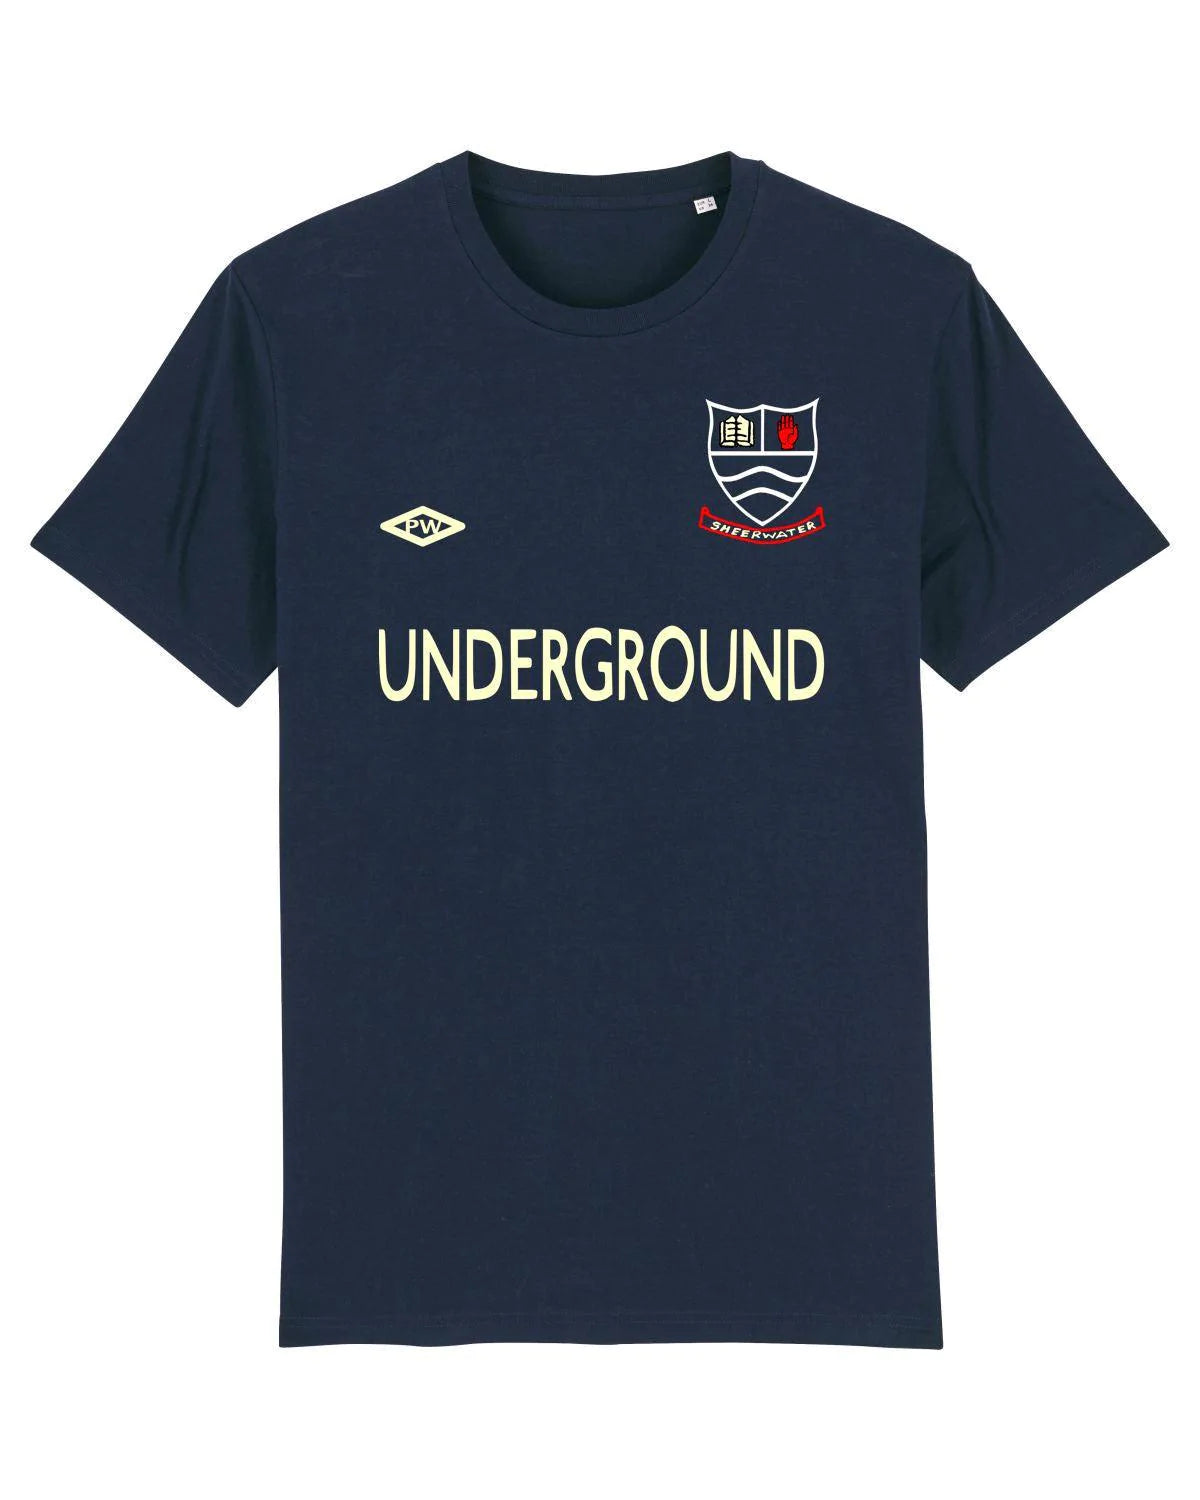 UNDERGROUND: T-Shirt Inspired by The Jam & Football - SOUND IS COLOUR